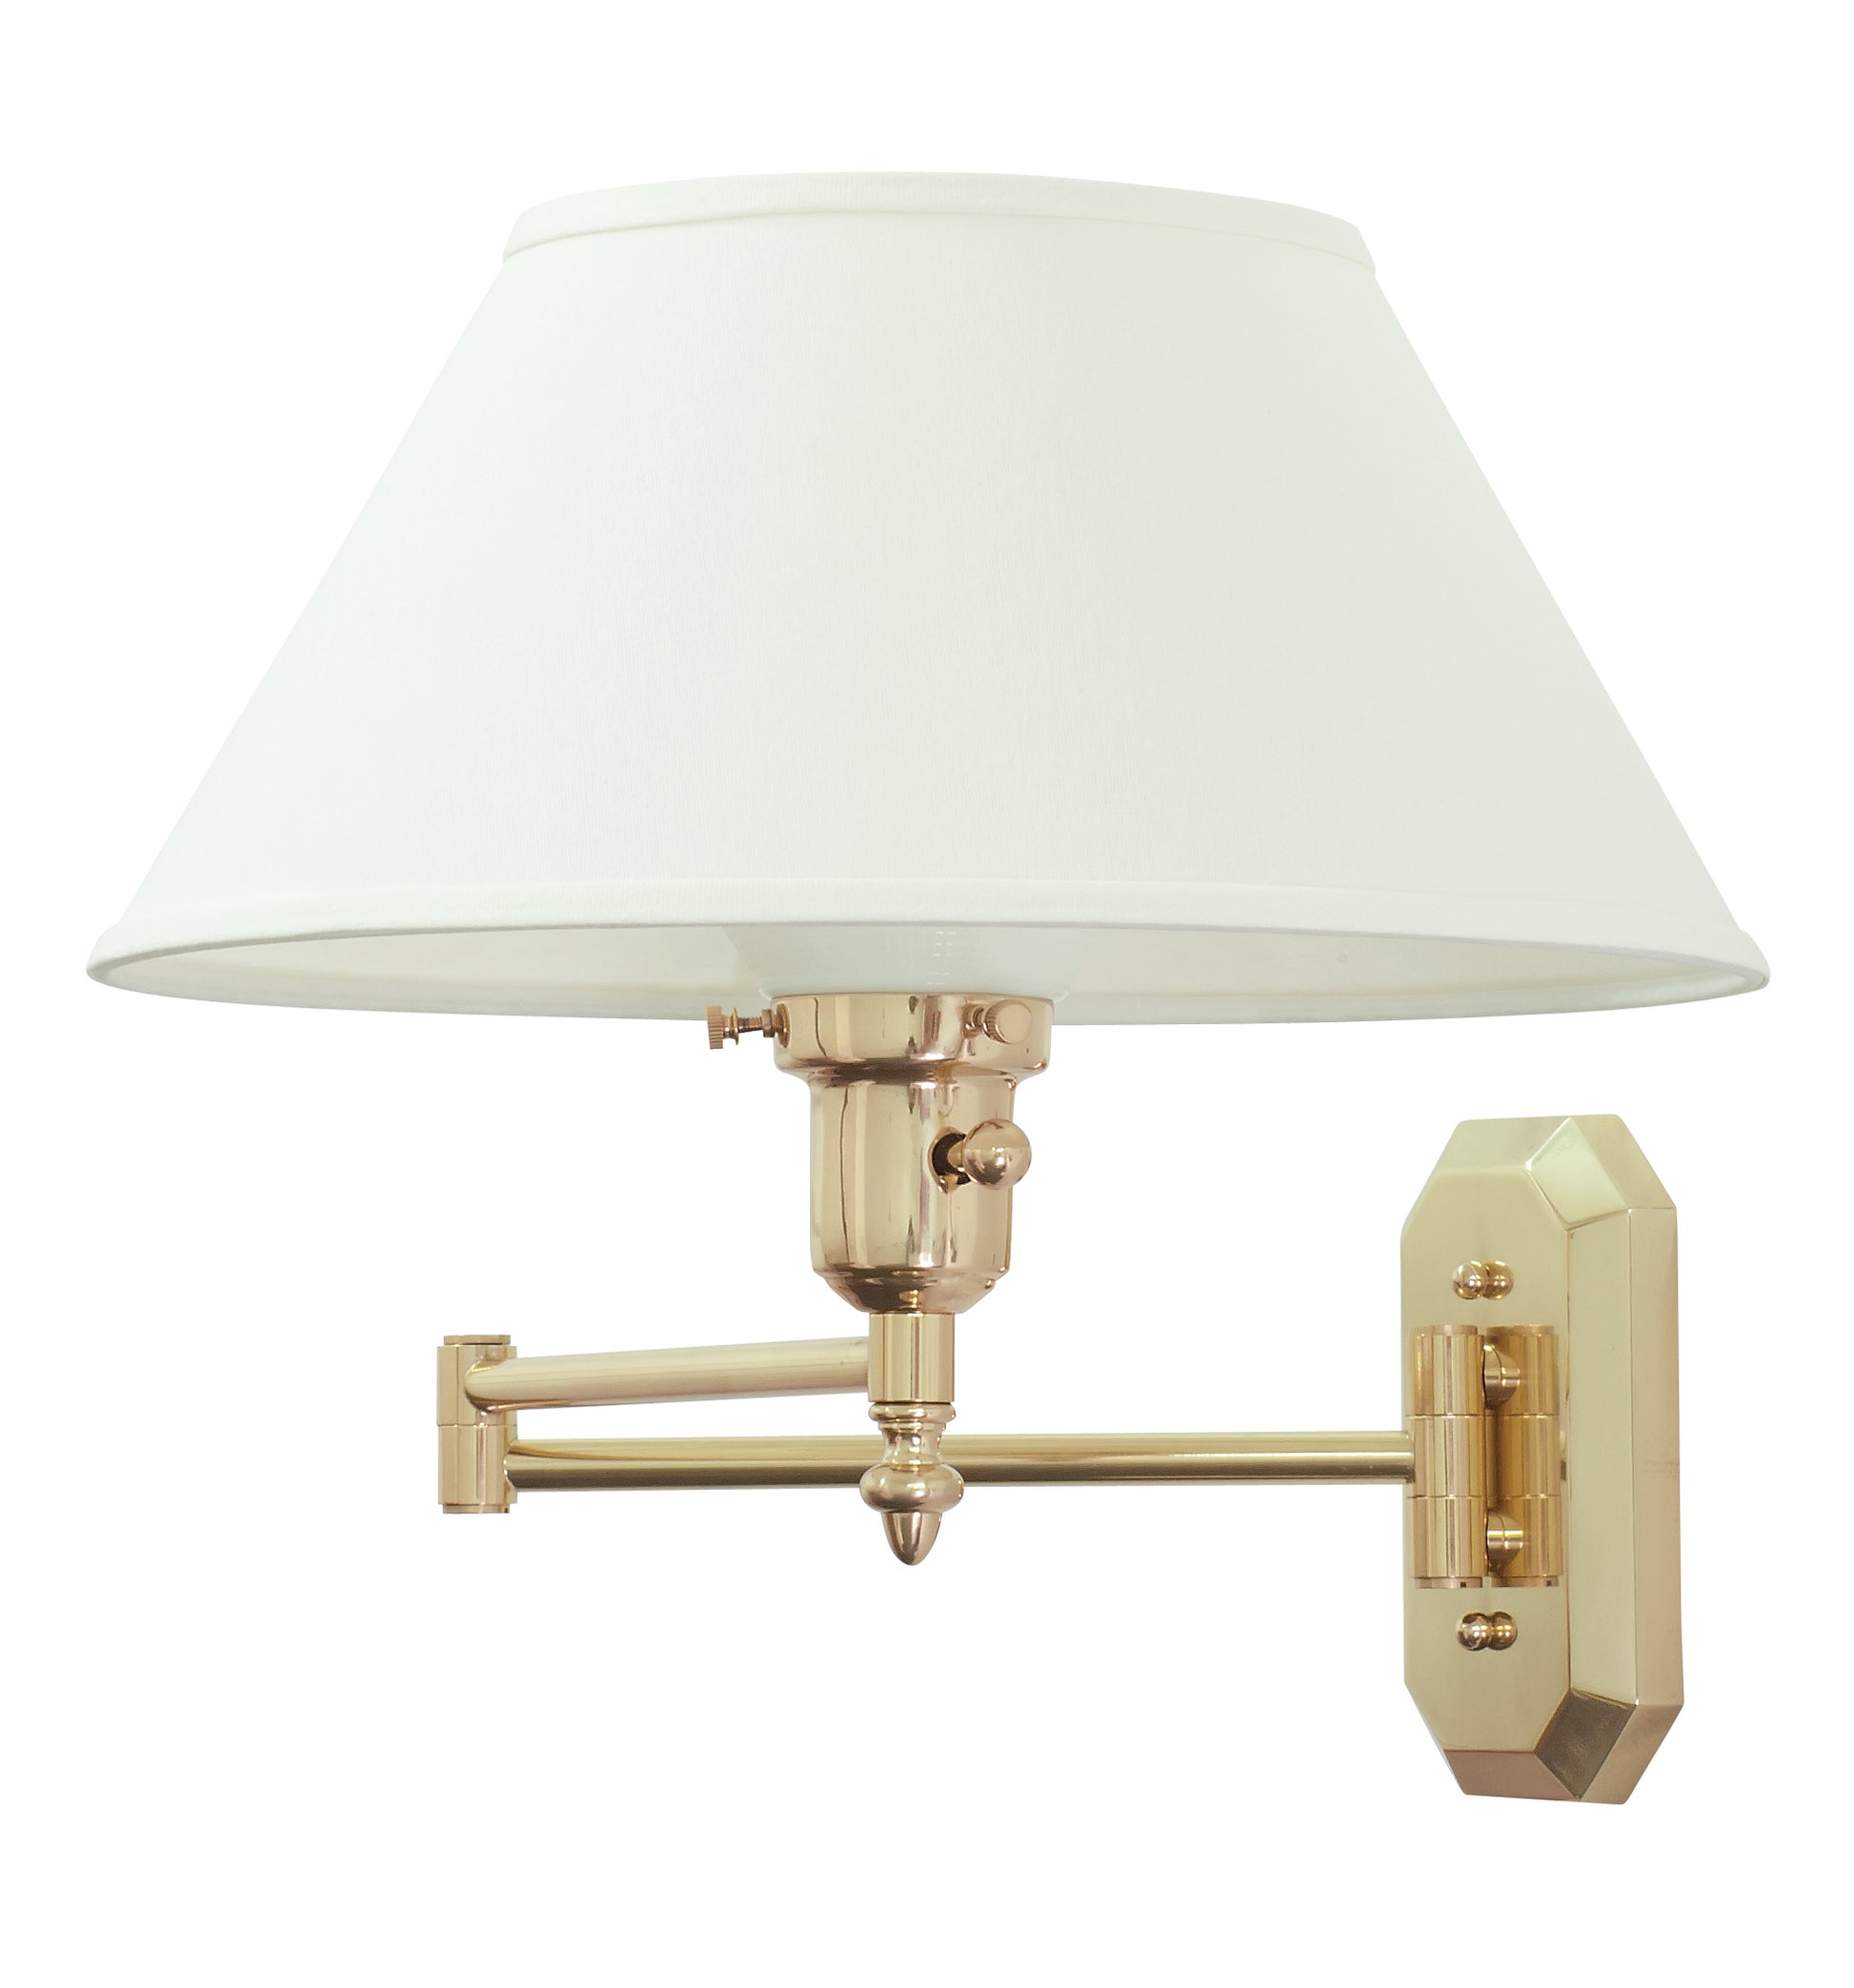 House of Troy Wall Swing Arm Lamp Polished Brass WS-704